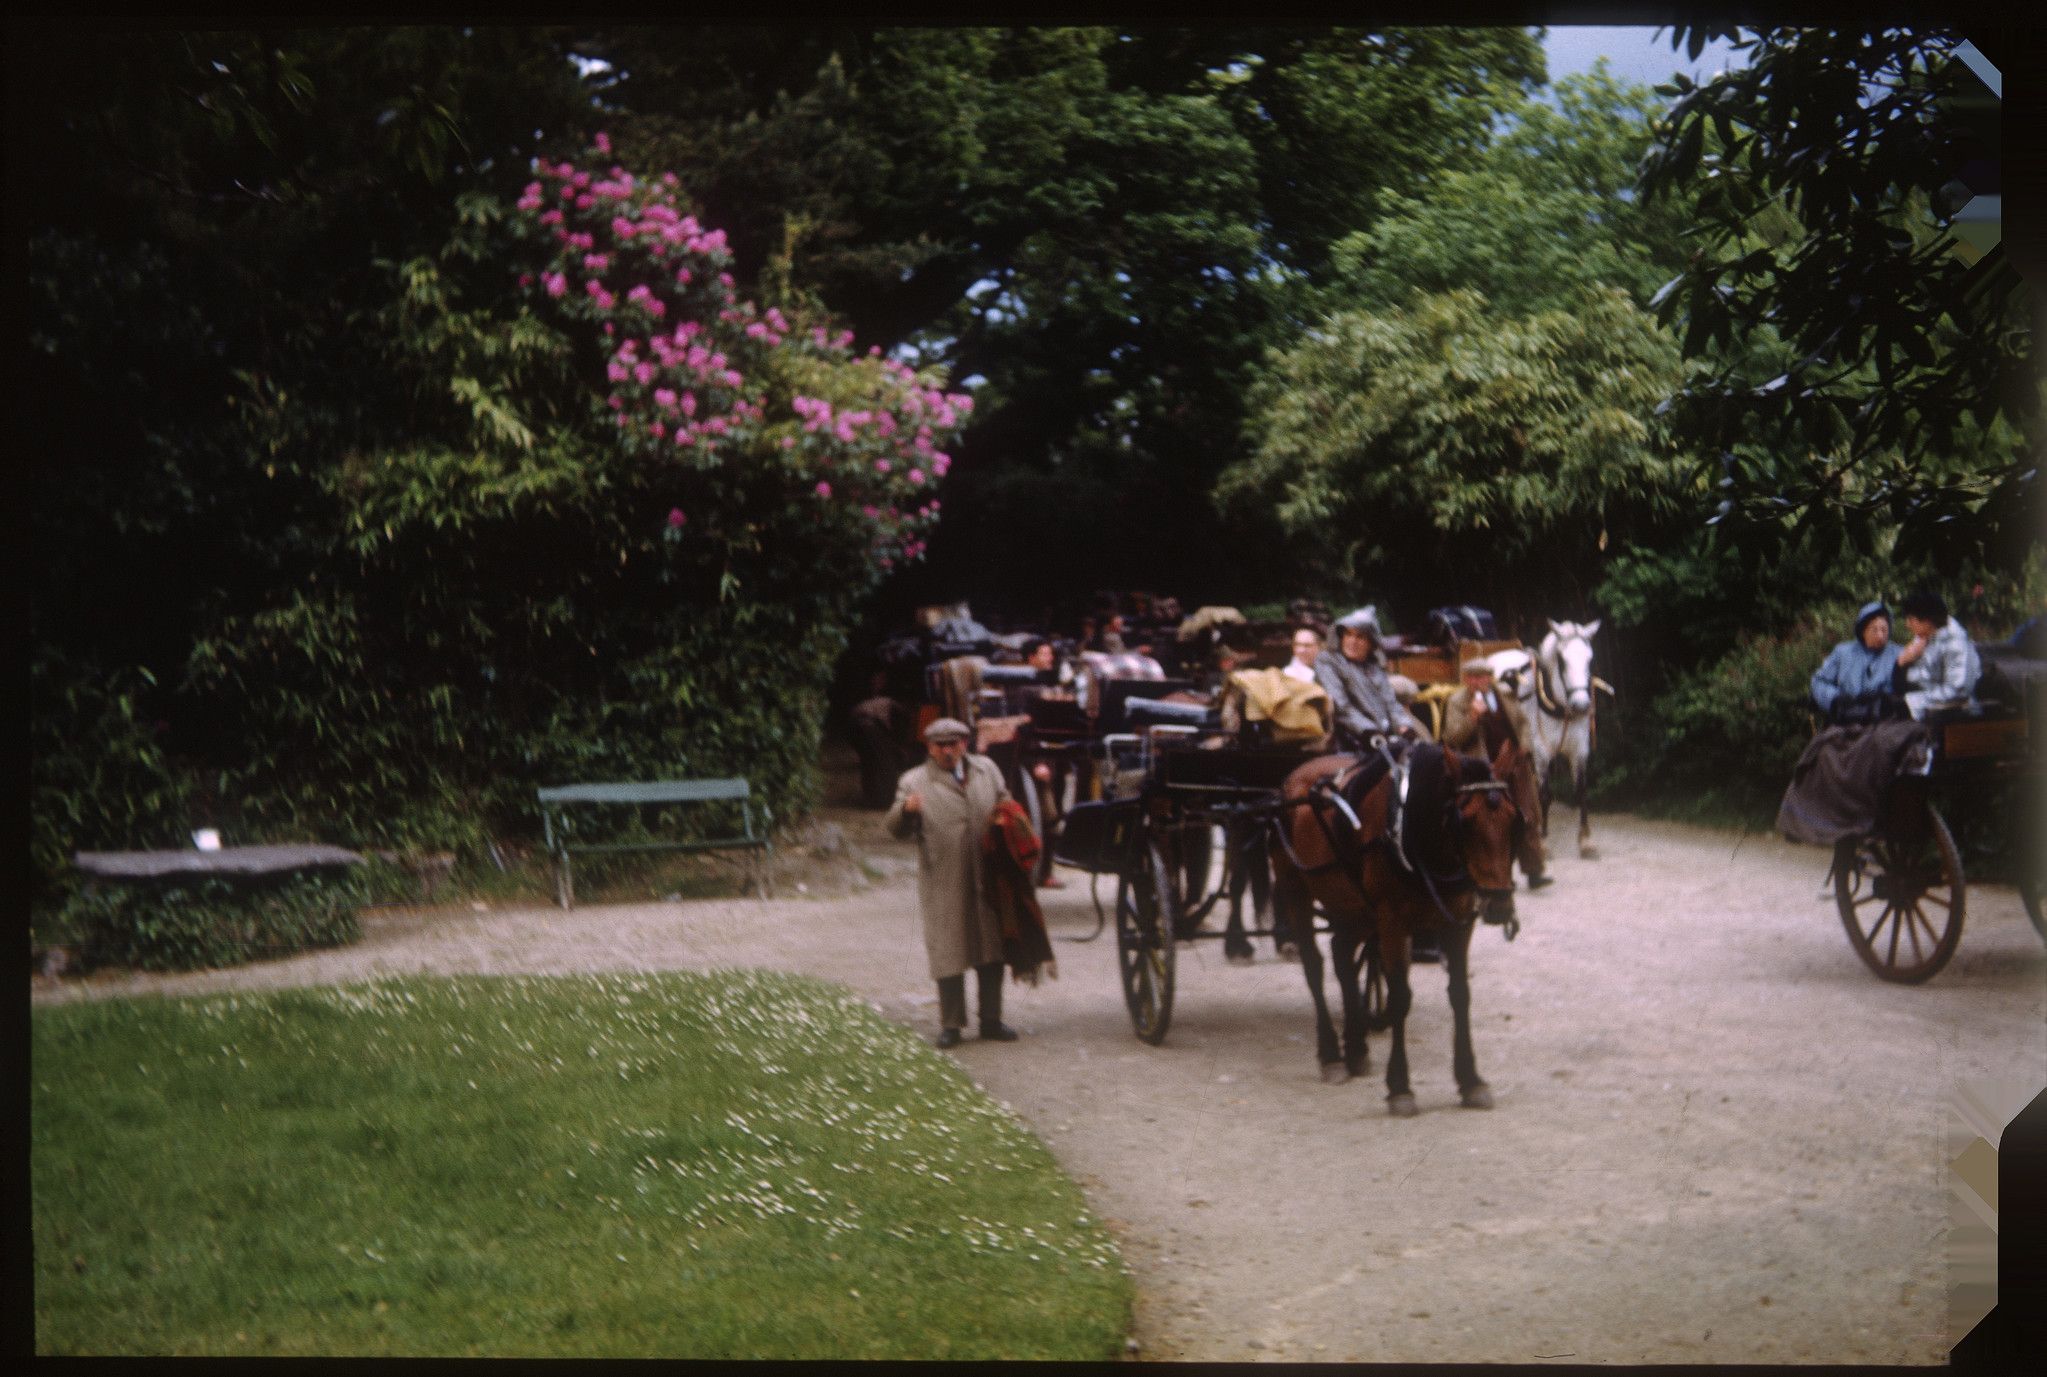 May 19, 1953, Jaunting cars going through the Killarney Lakes and park. May 19, 1953. Photo by  Martin J. Walsh Jr, of Murdock Minnesota, Kodachrome slide